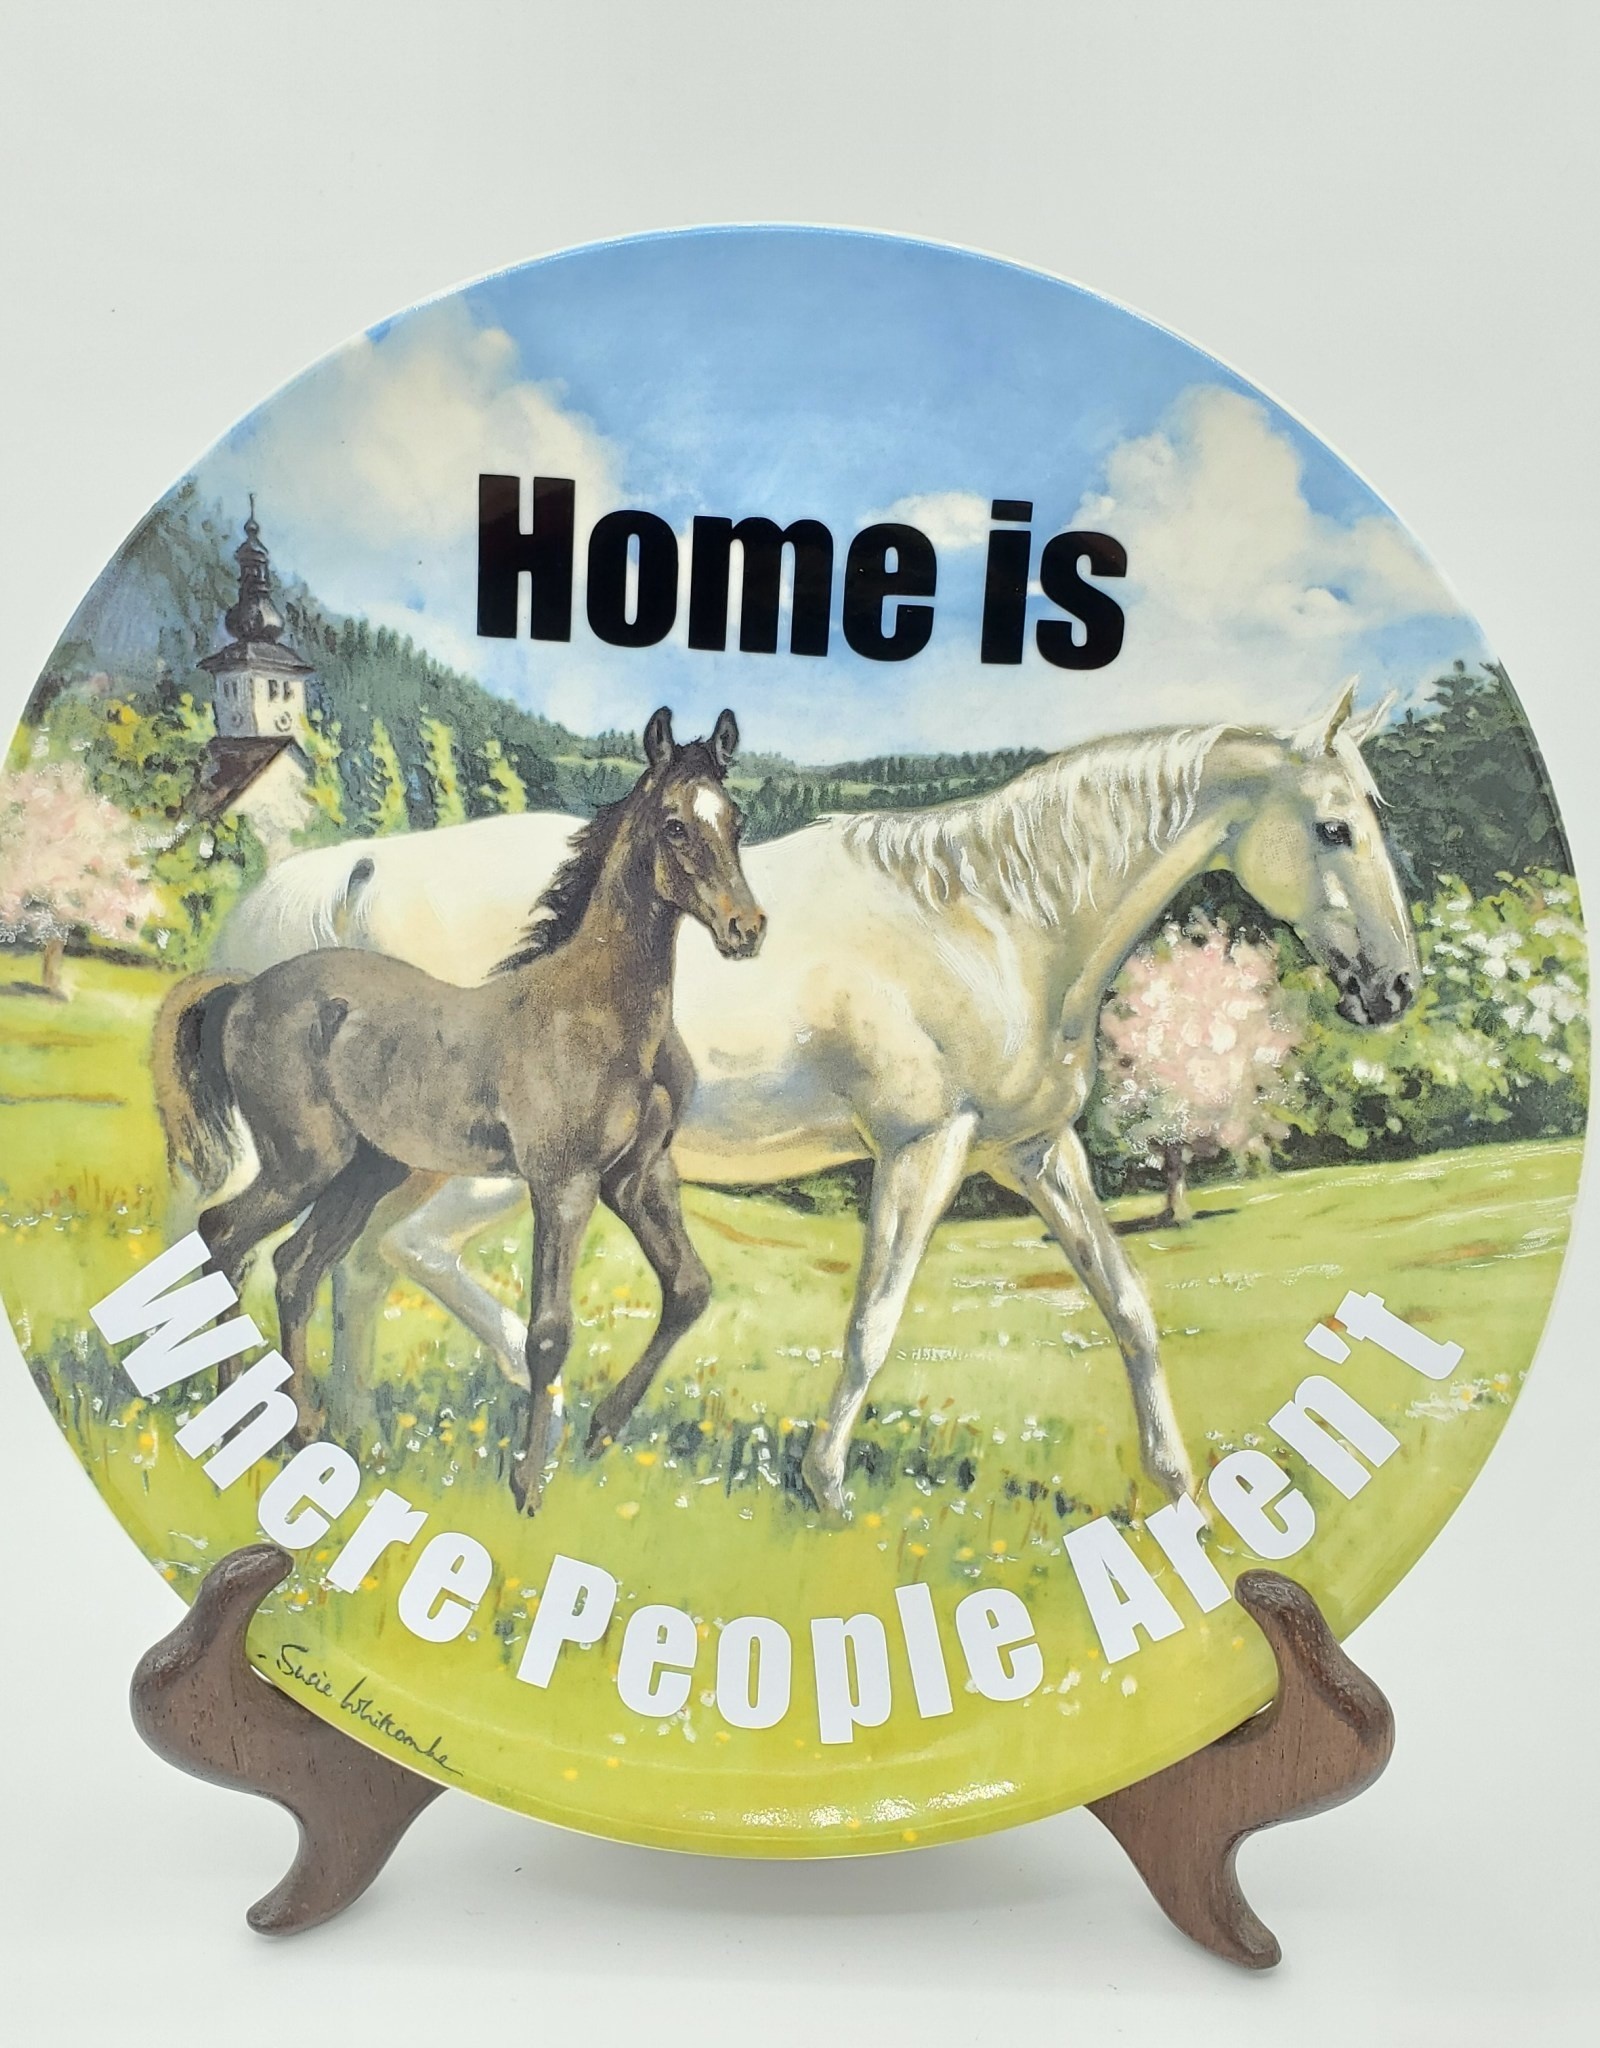 Redux "Home is where the people Aren't" - Vintage Upcycled Plate Art